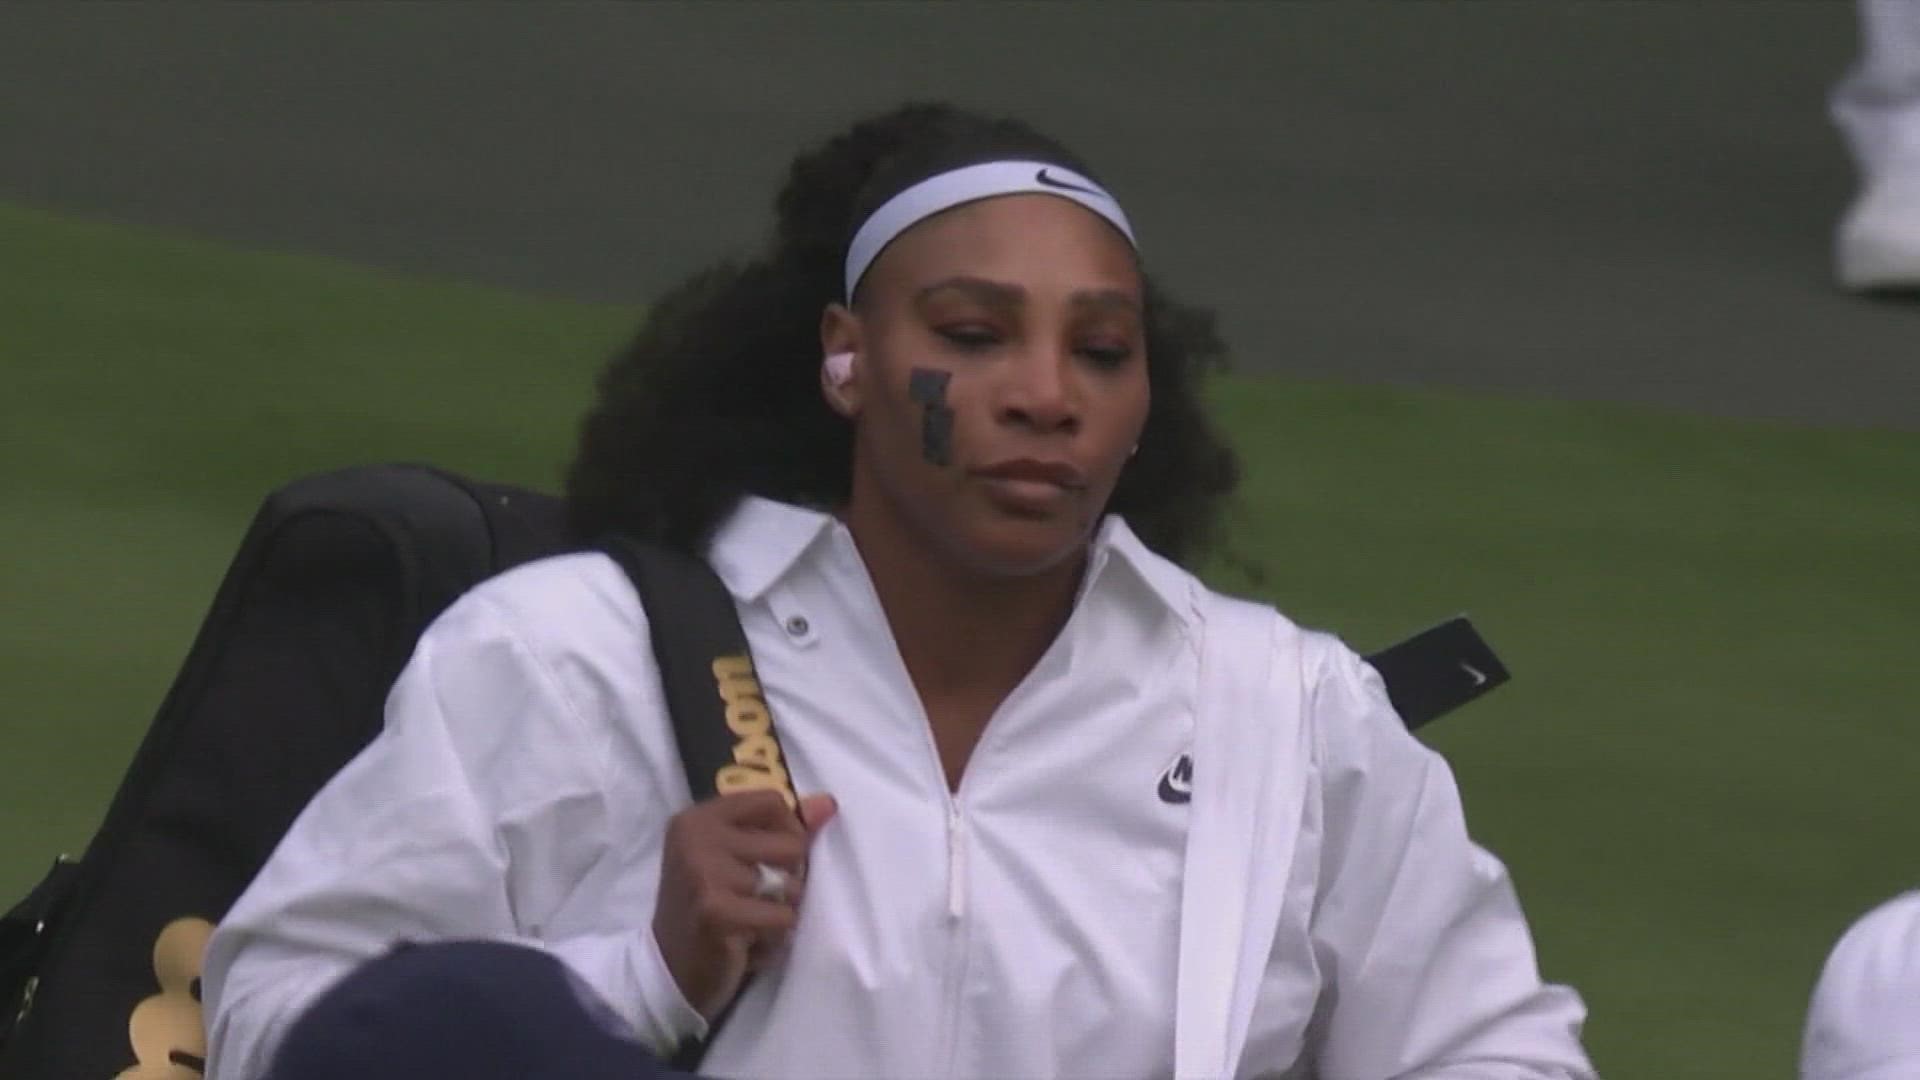 Asked whether this might have been her last match, Williams replied: “That’s a question I can’t answer. I don’t know. ... Who knows? Who knows where I’ll pop up?”